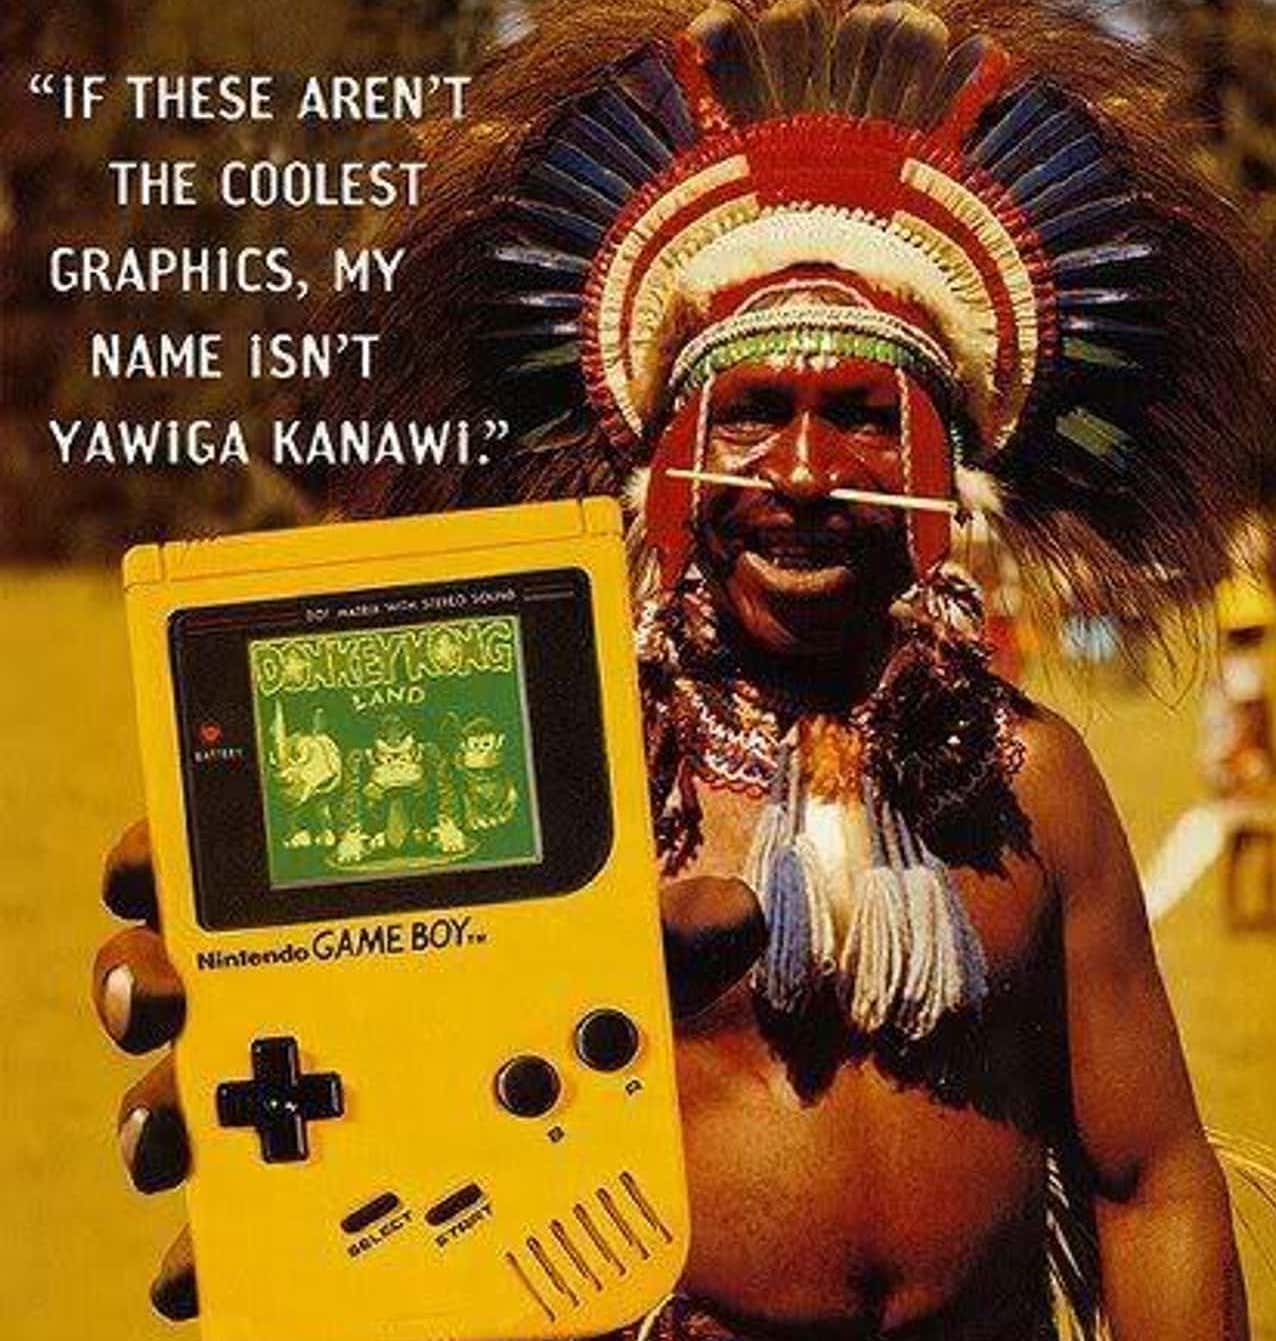 Vintage Gaming Ads - if these arent the coolest graphics my name isnt yawiga kanawi - "If These Aren'T The Coolest Graphics, My Name Isn'T Yawiga Kanawi." 10 matka wiK Seo Sound Donkey Kong Land Eauery Nintendo Game Boy.. Gelect